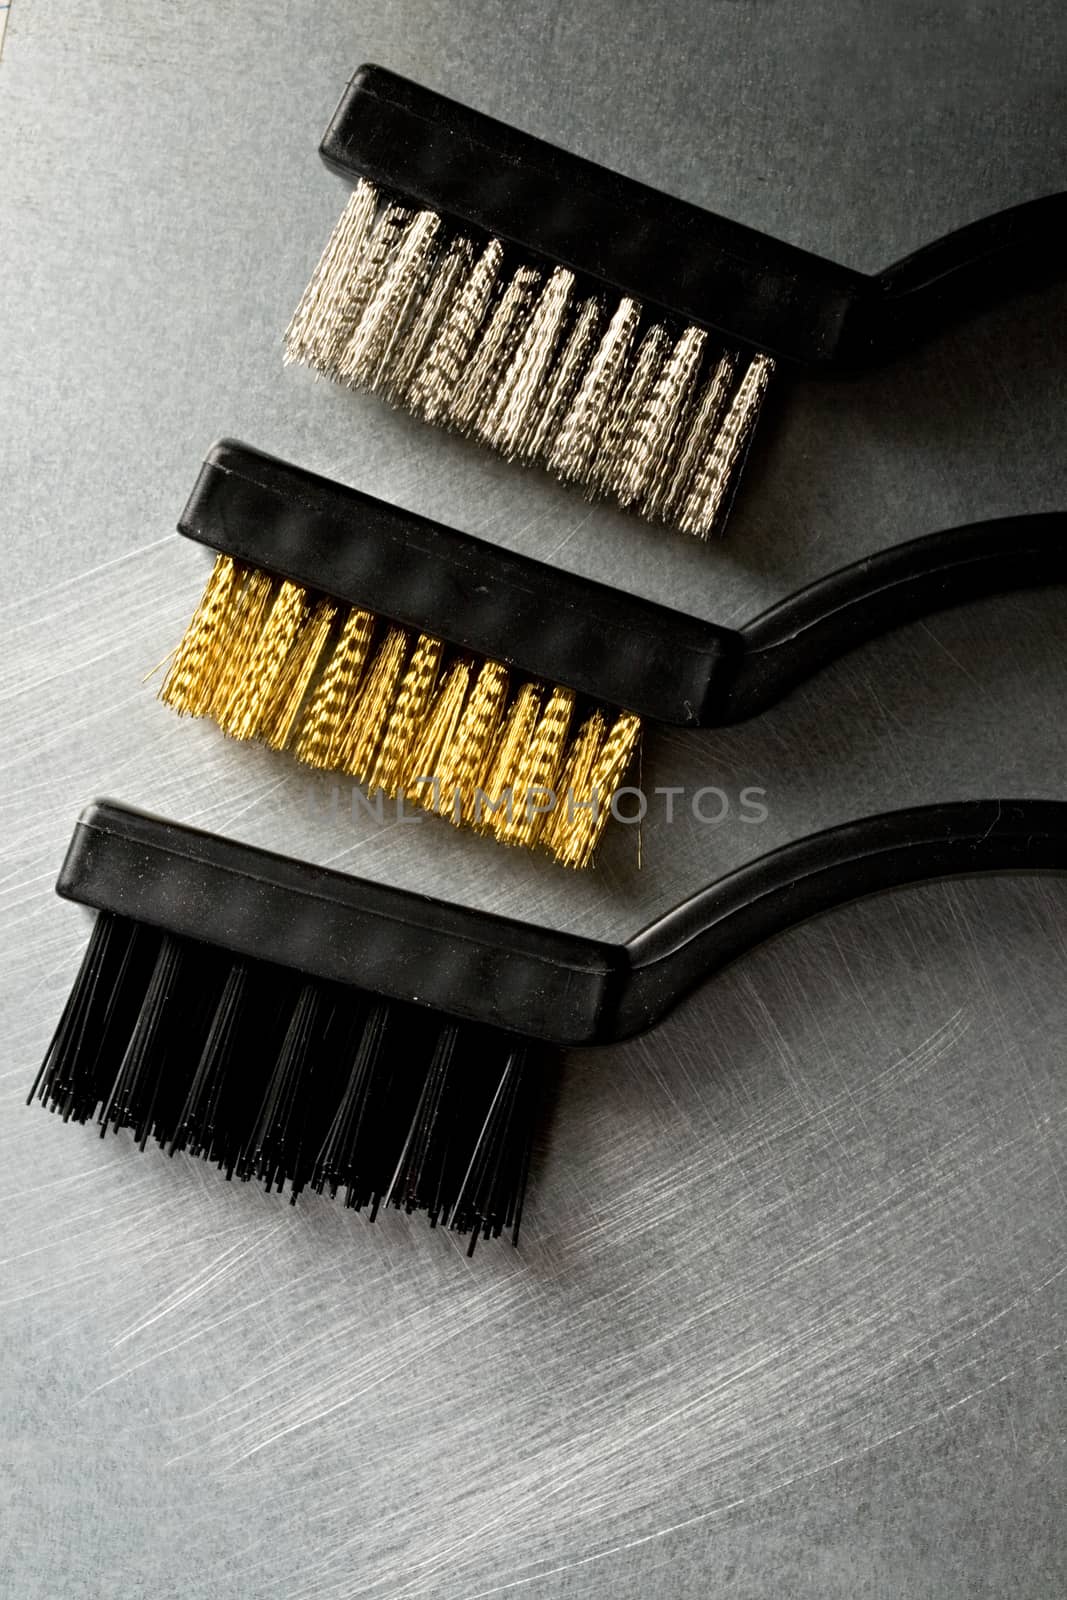 Metal brushes on steel background